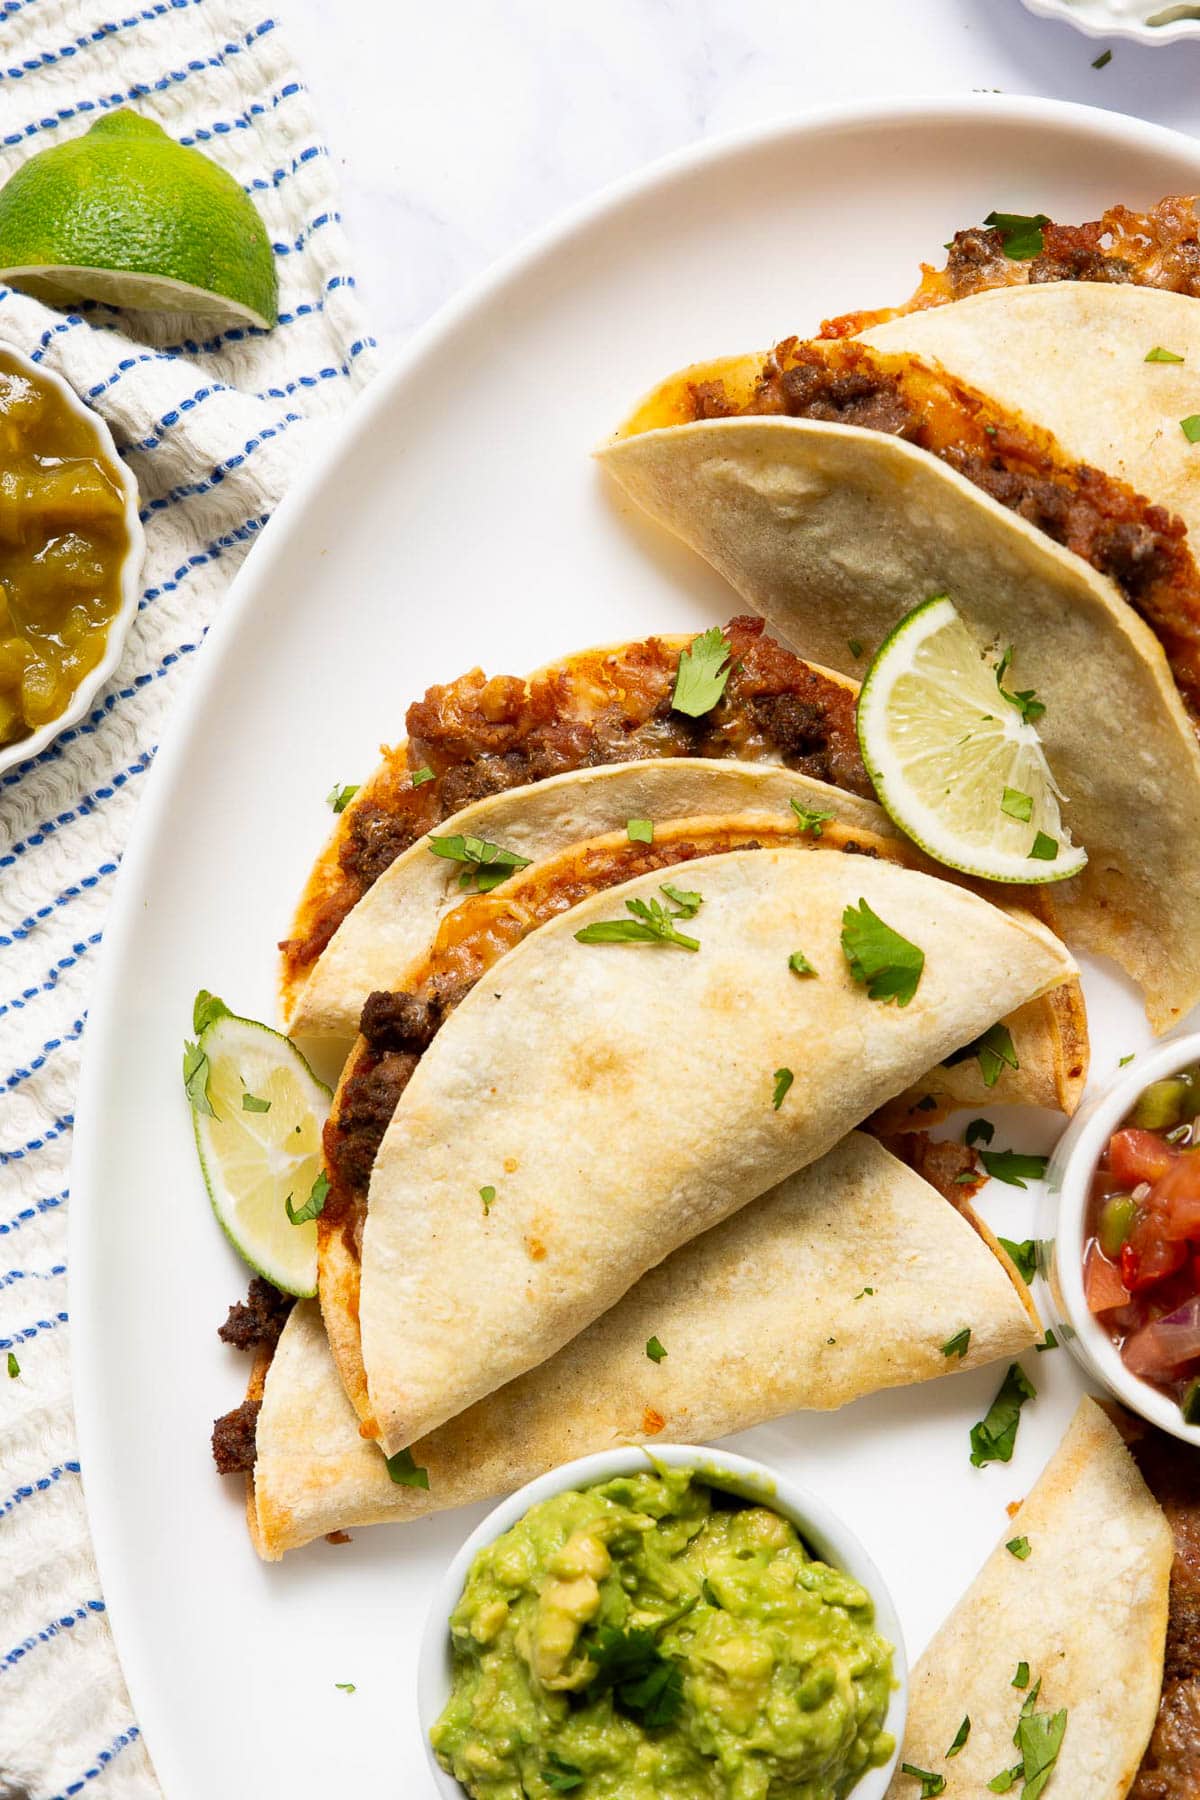 Crispy baked tacos with ground beef.